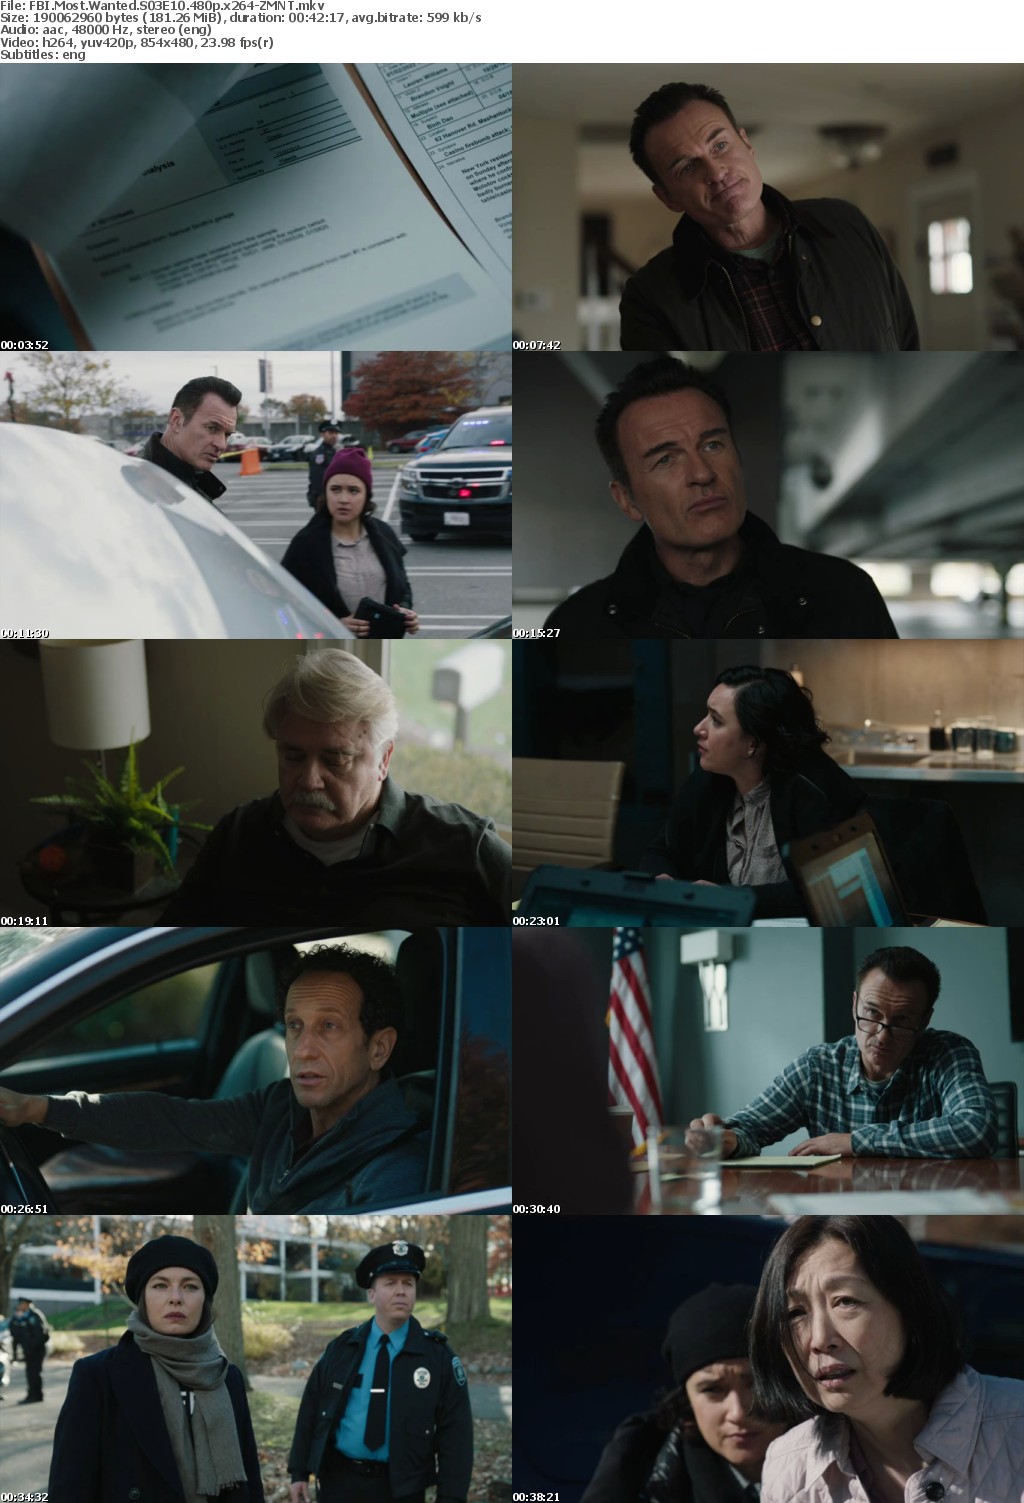 FBI Most Wanted S03E10 480p x264-ZMNT